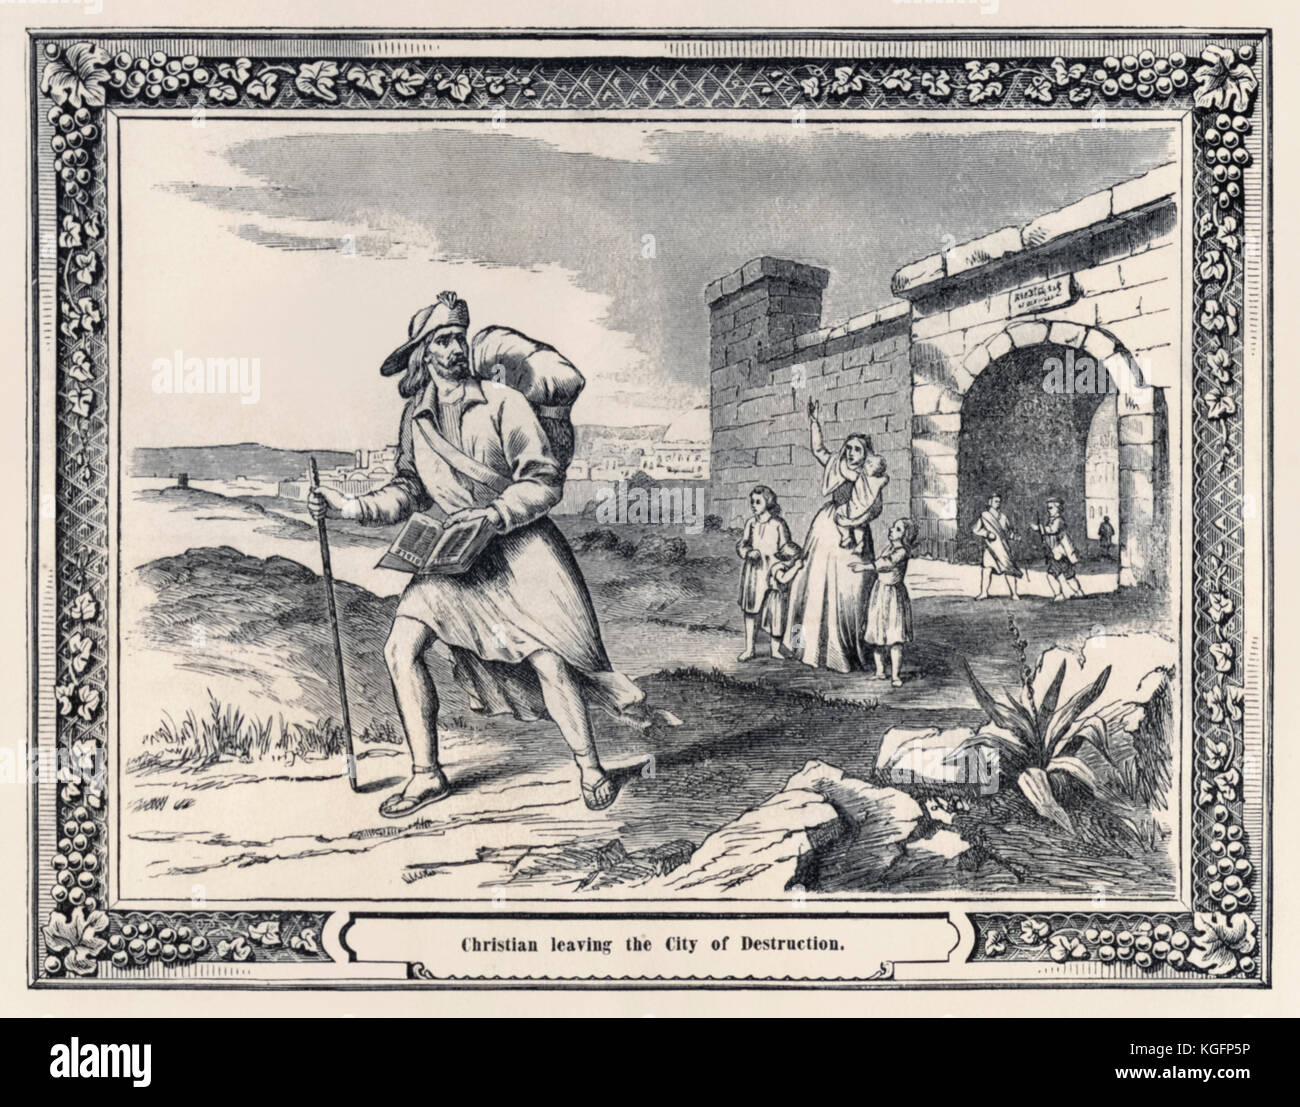 ‘Christian leaving the City of Destruction’ from the ‘Pictorial Pilgrim's Progress’ published by H. H. Lloyd & Co. NYC in 1862 based on ‘The Pilgrim’s Progress From This World, To That Which Is To Come’ by John Bunyan (1628-1688) first published in 1678. Stock Photo